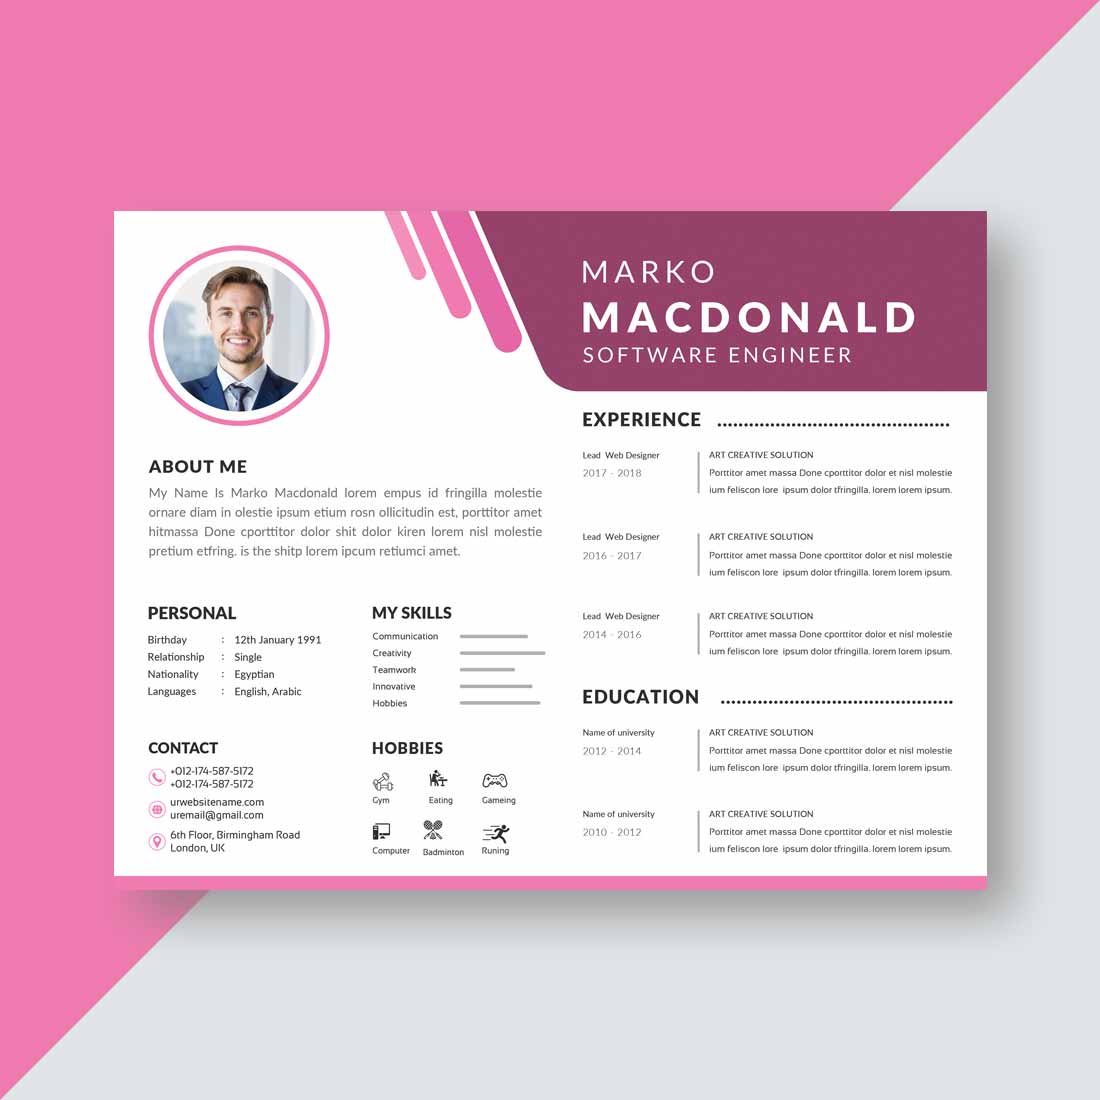 Professional resume template for a software engineer.